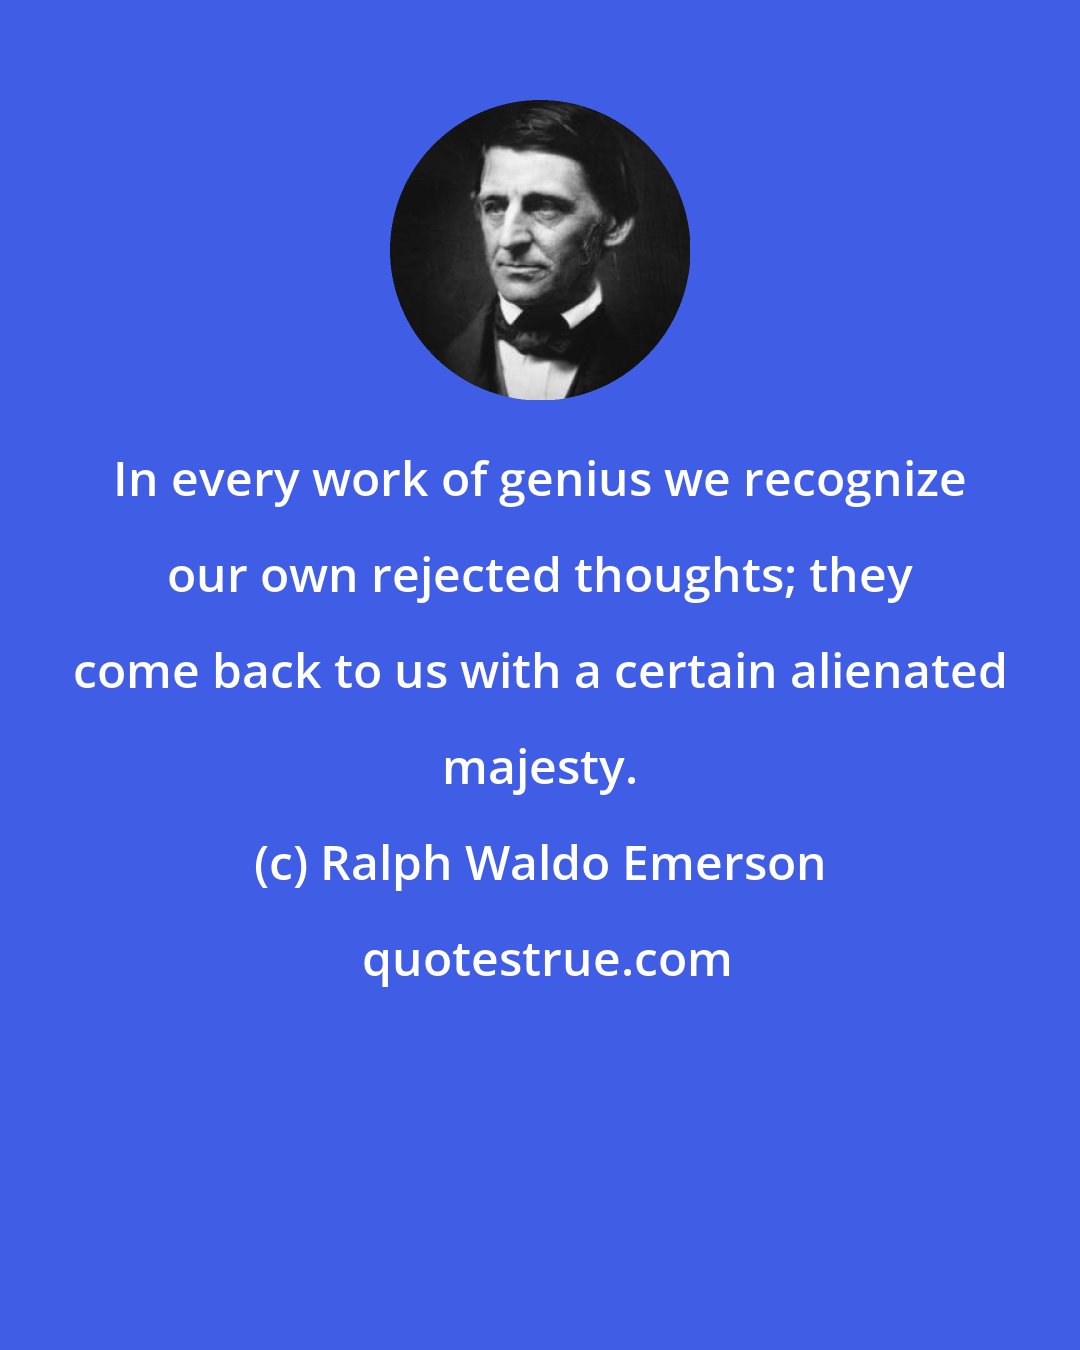 Ralph Waldo Emerson: In every work of genius we recognize our own rejected thoughts; they come back to us with a certain alienated majesty.